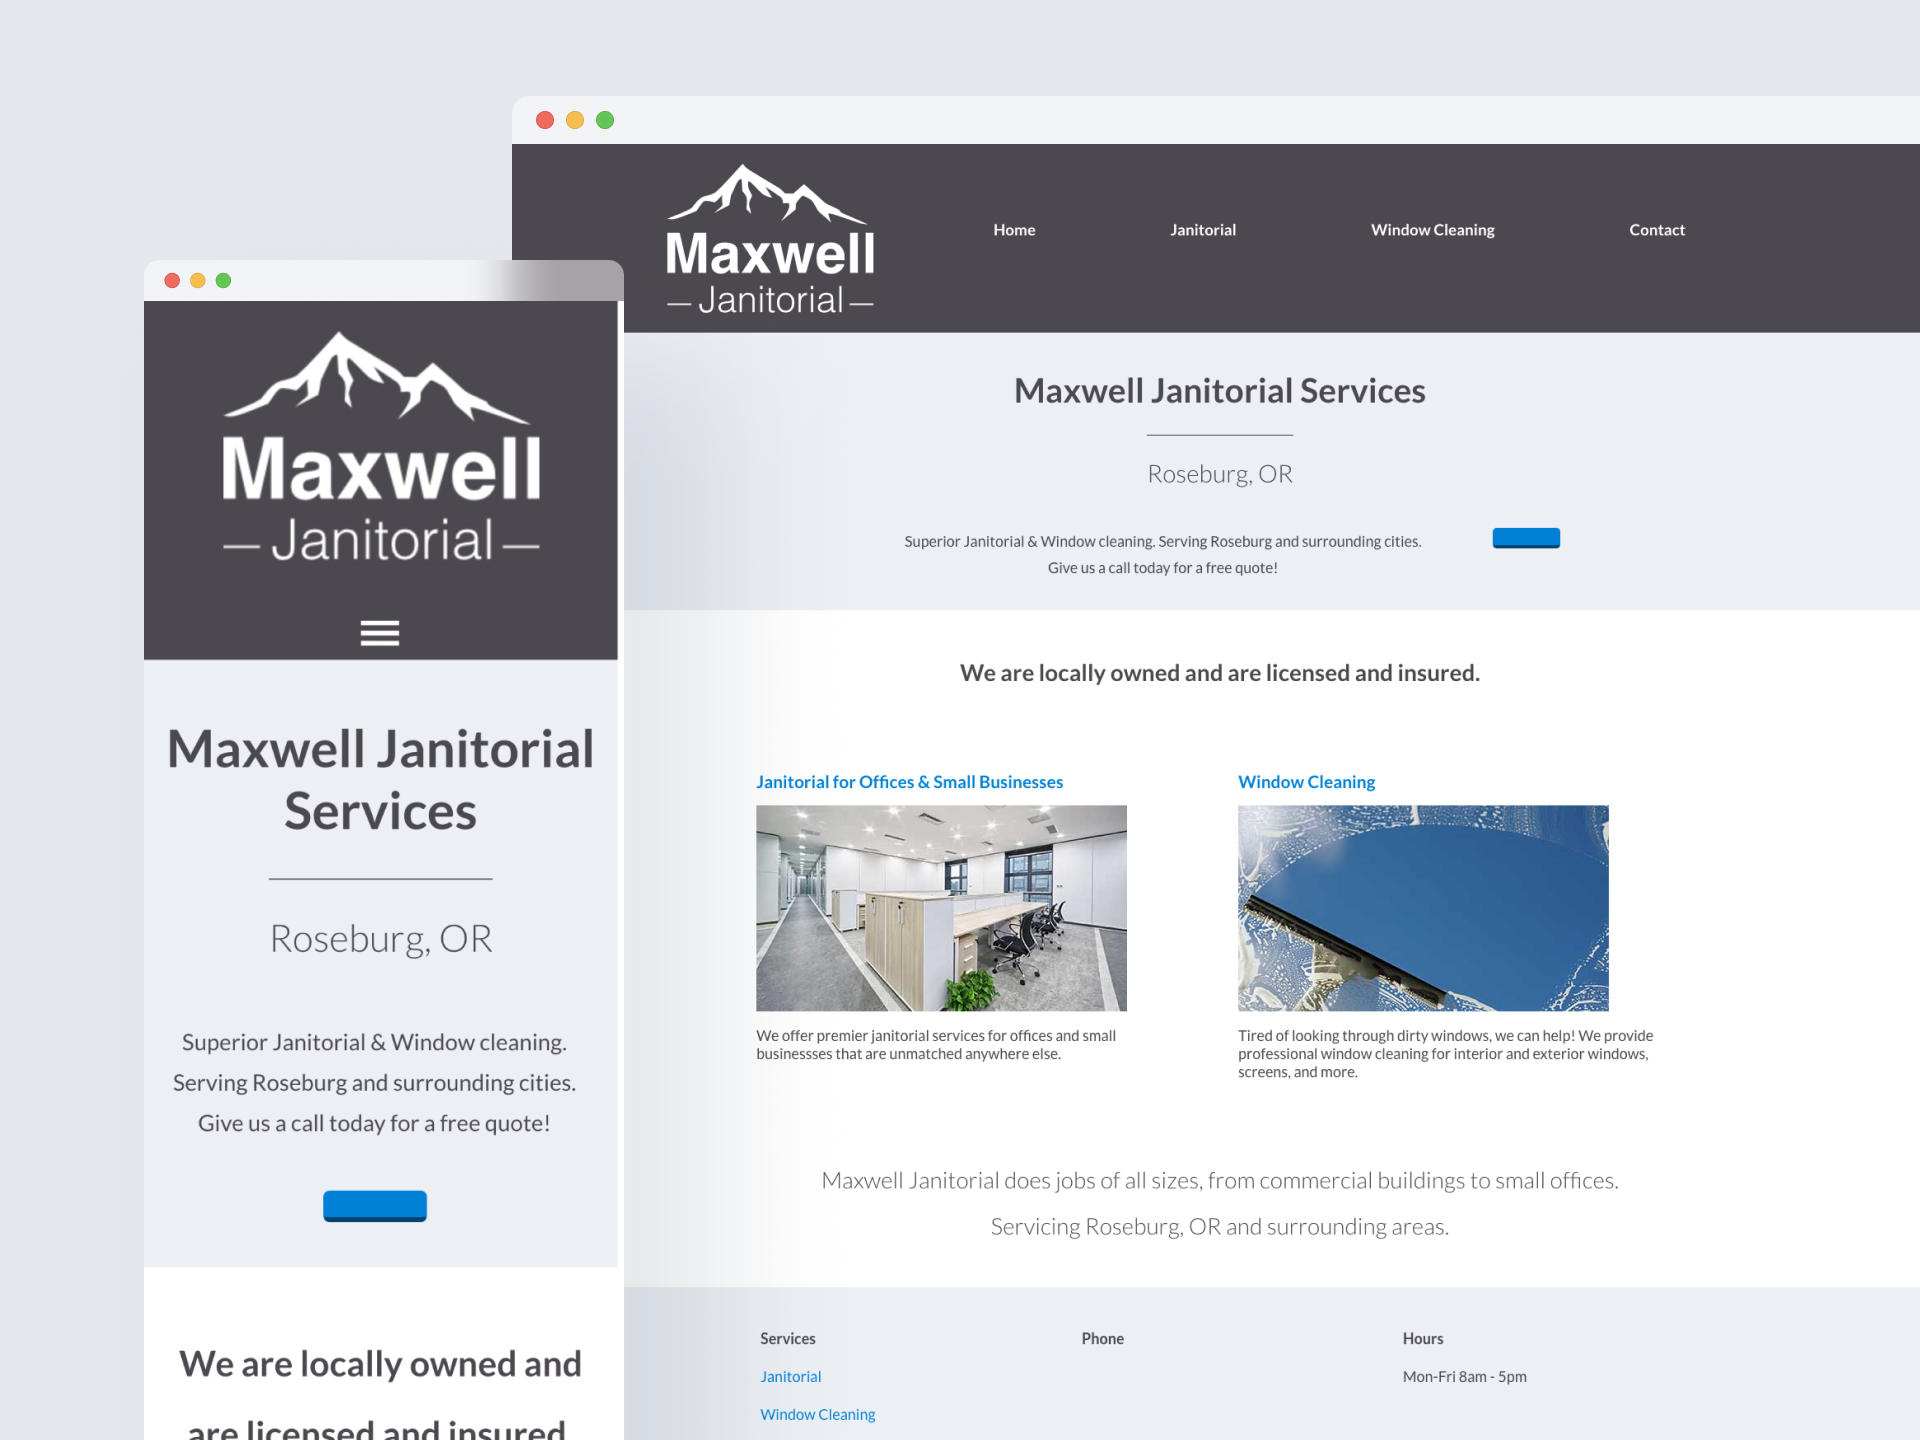 Website designed for Maxwell Janitorial